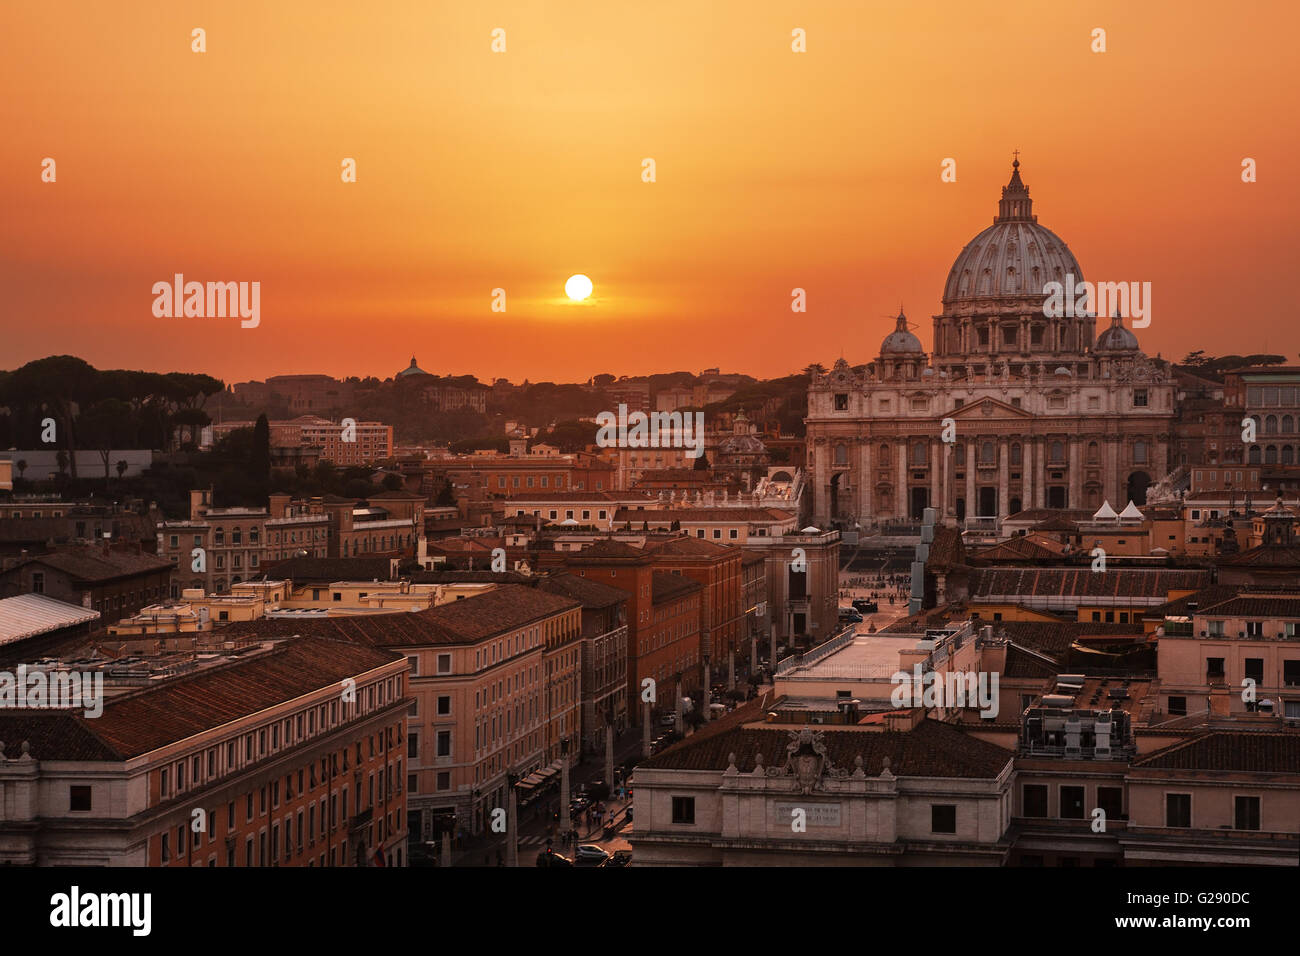 Beautiful sunset over Rome (Italy) and Vatican City. St. Peter's Basilica on background. Stock Photo